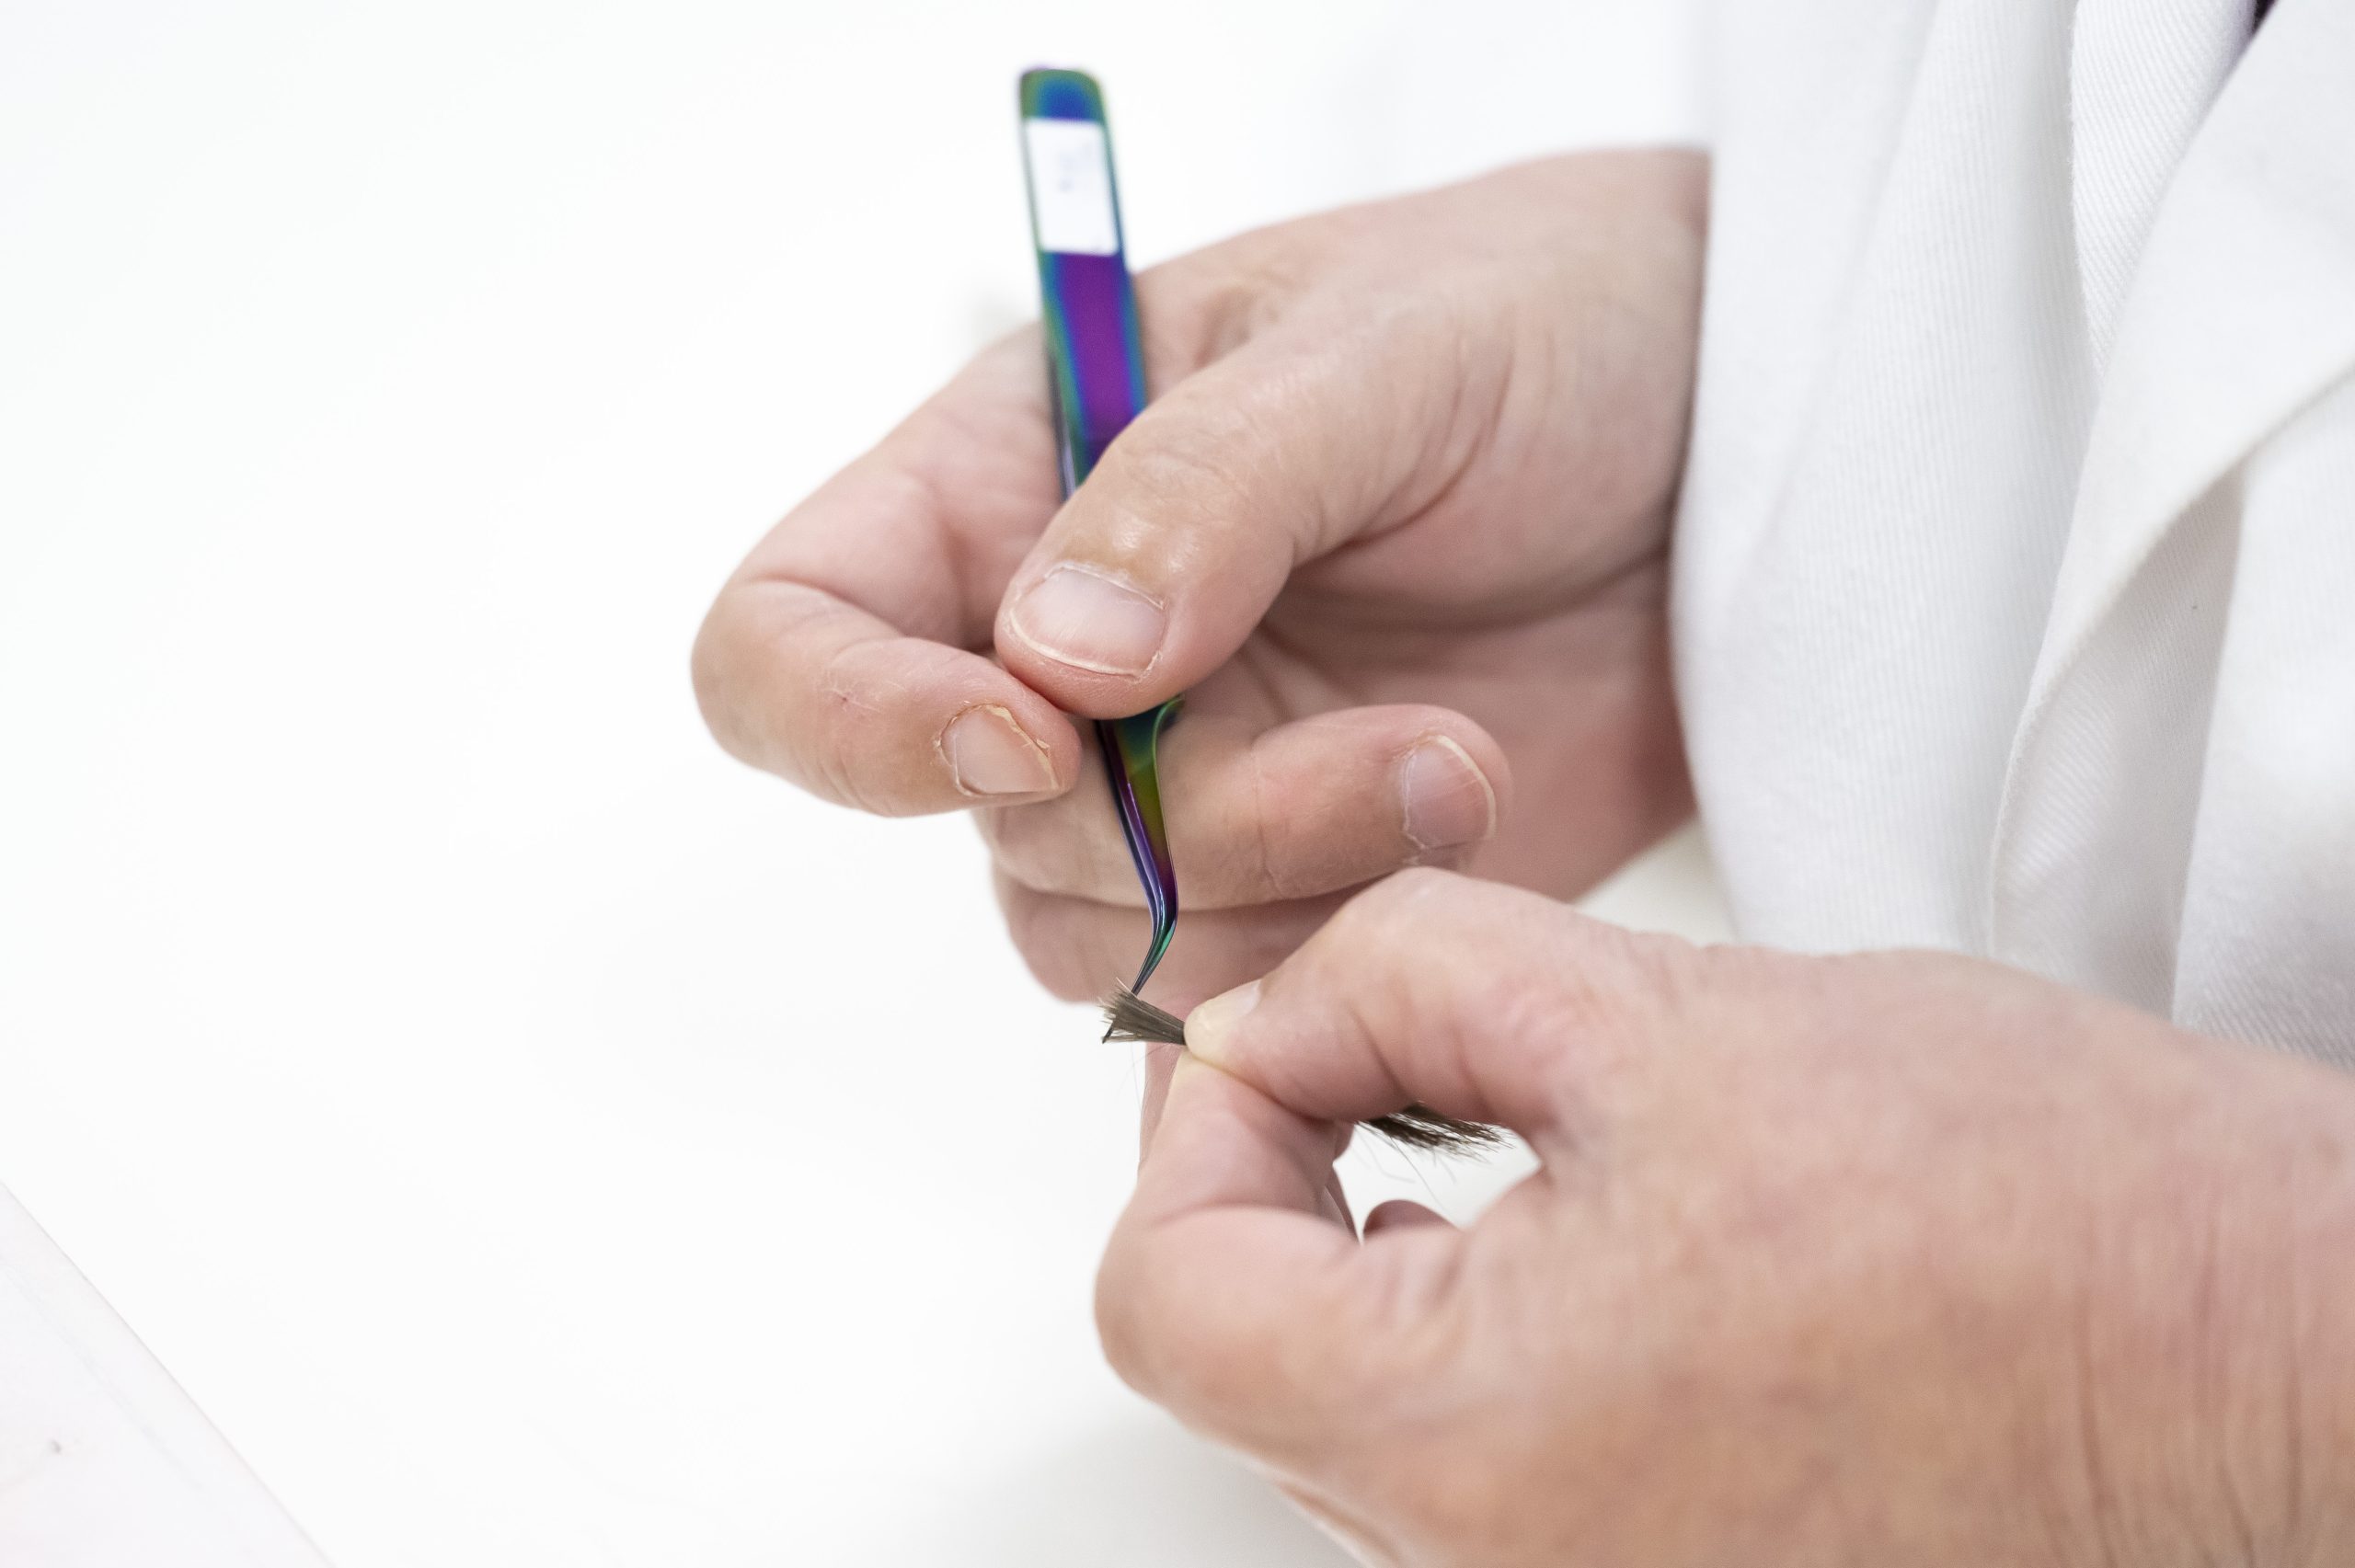 A Cansford scientist is using tweezers to separate a stand of hair ready for drug testing